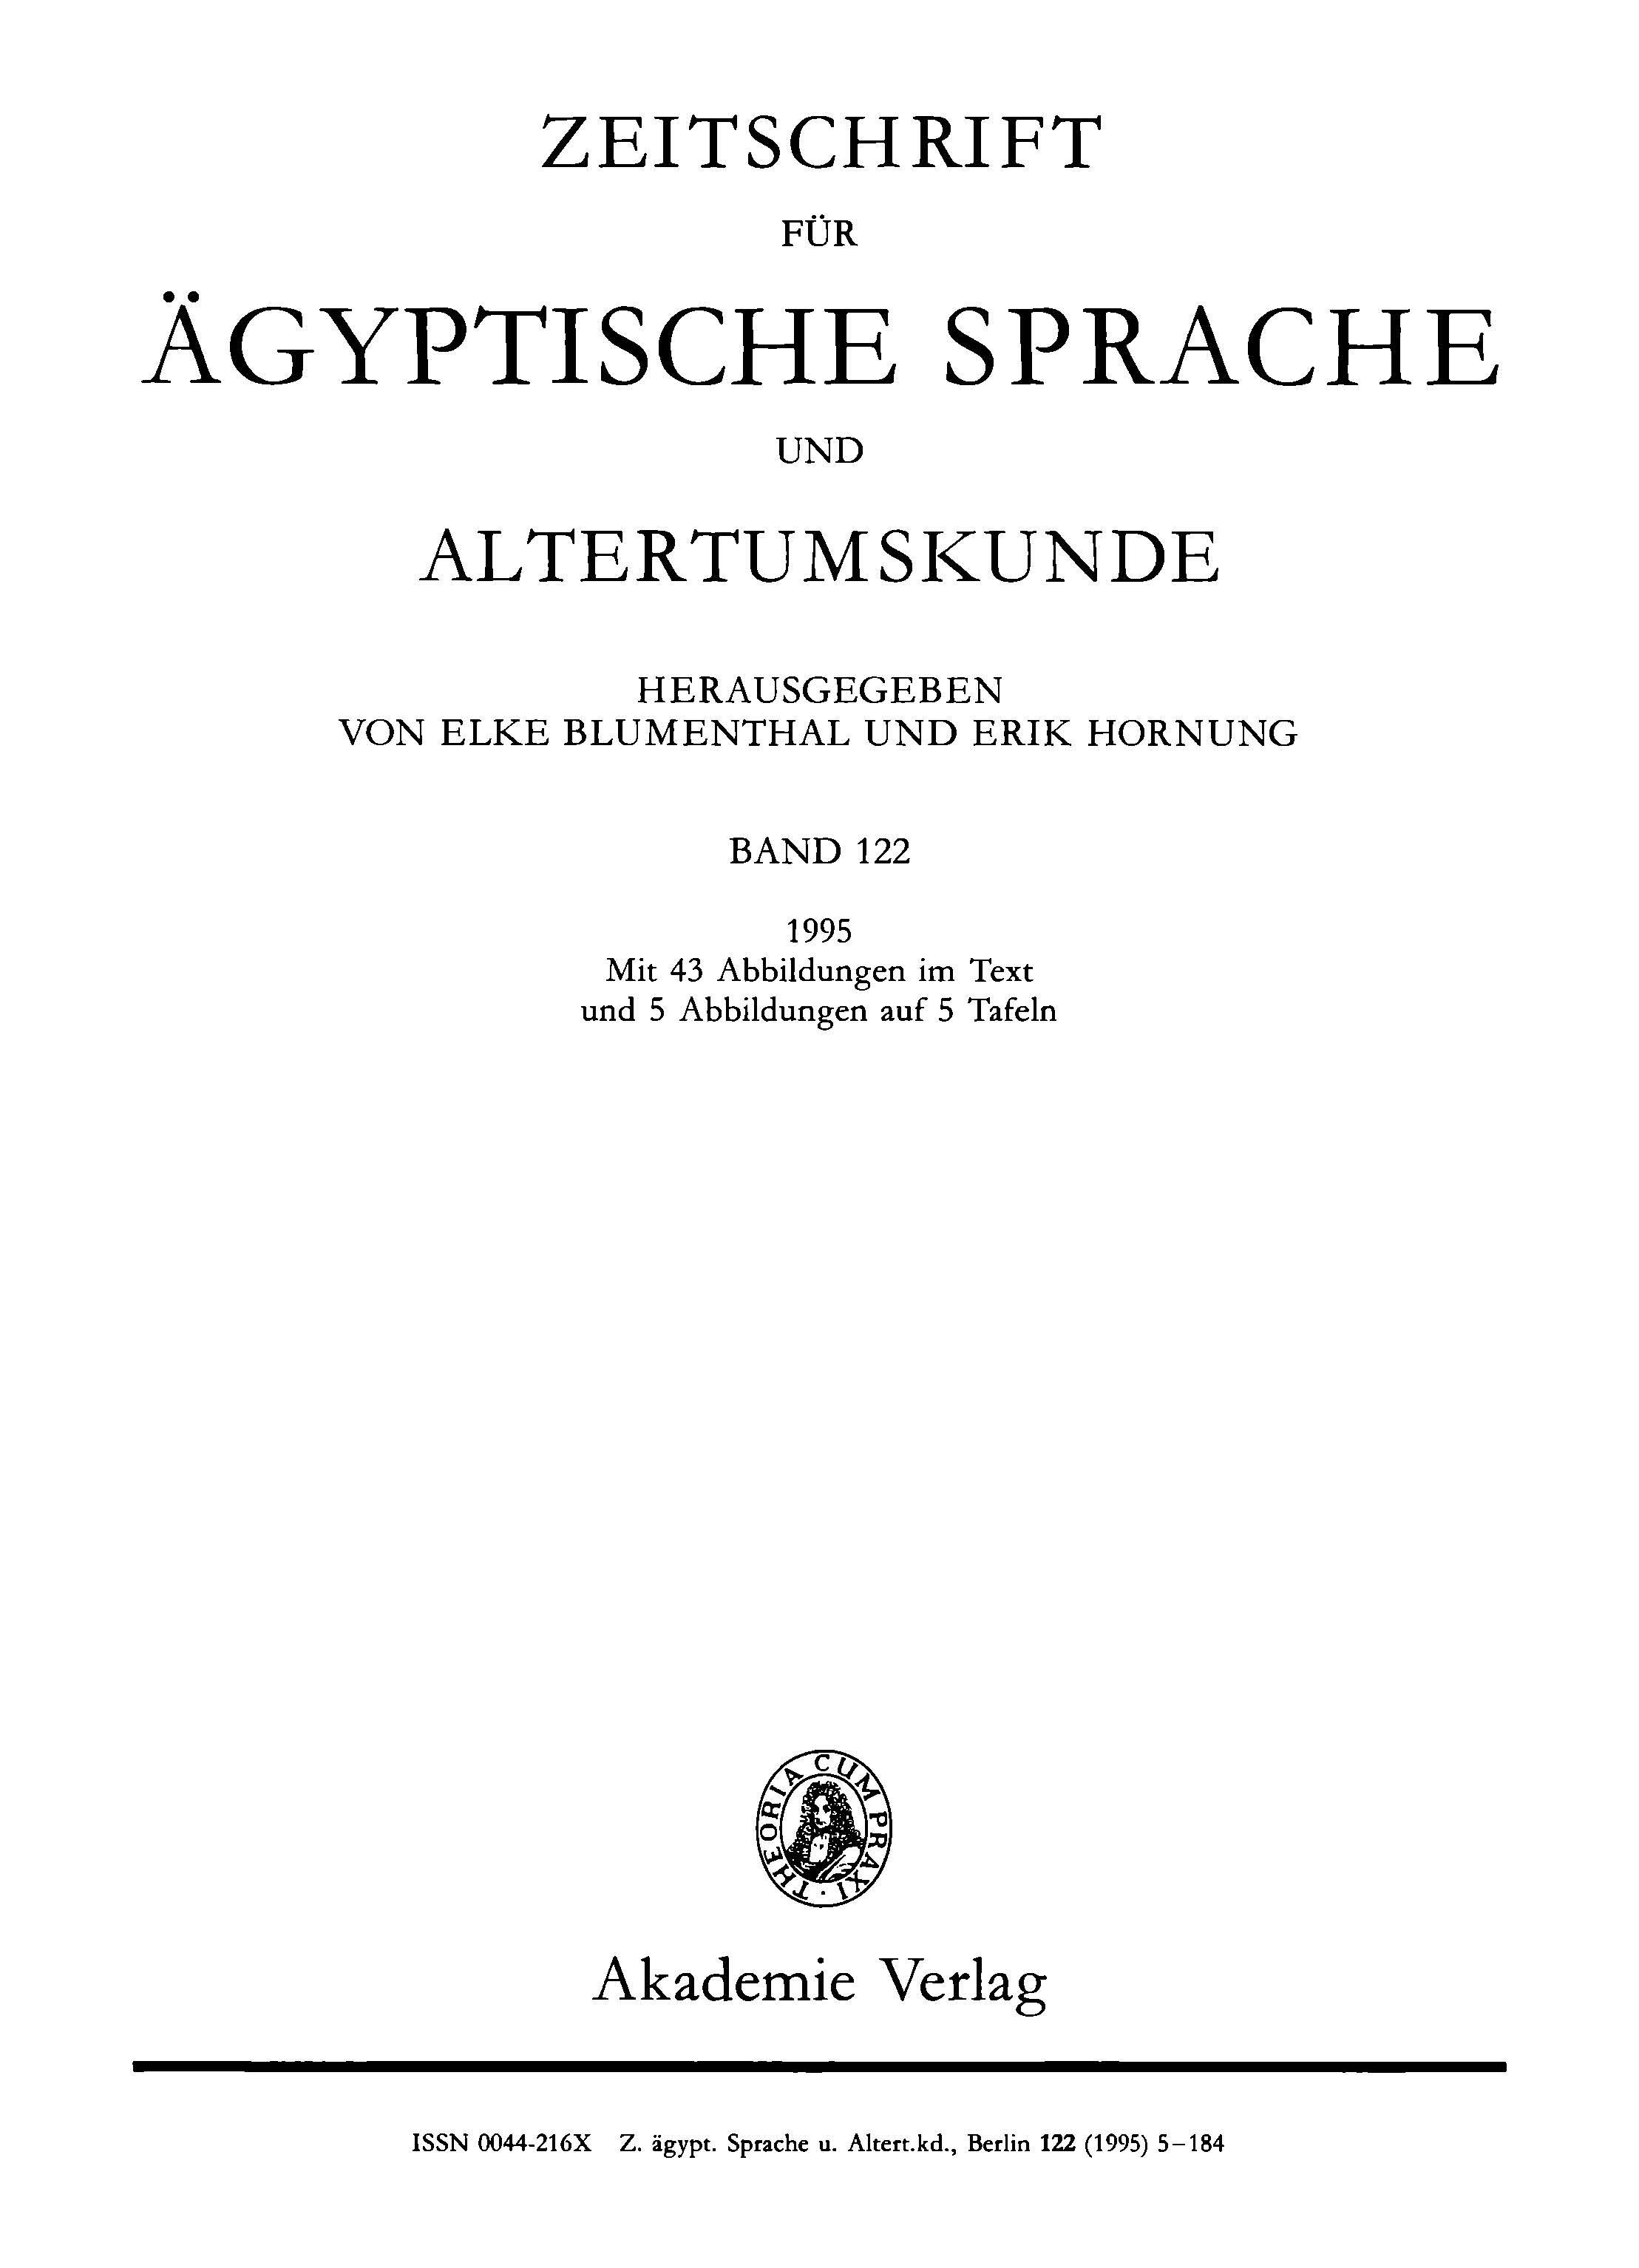 cover page with text